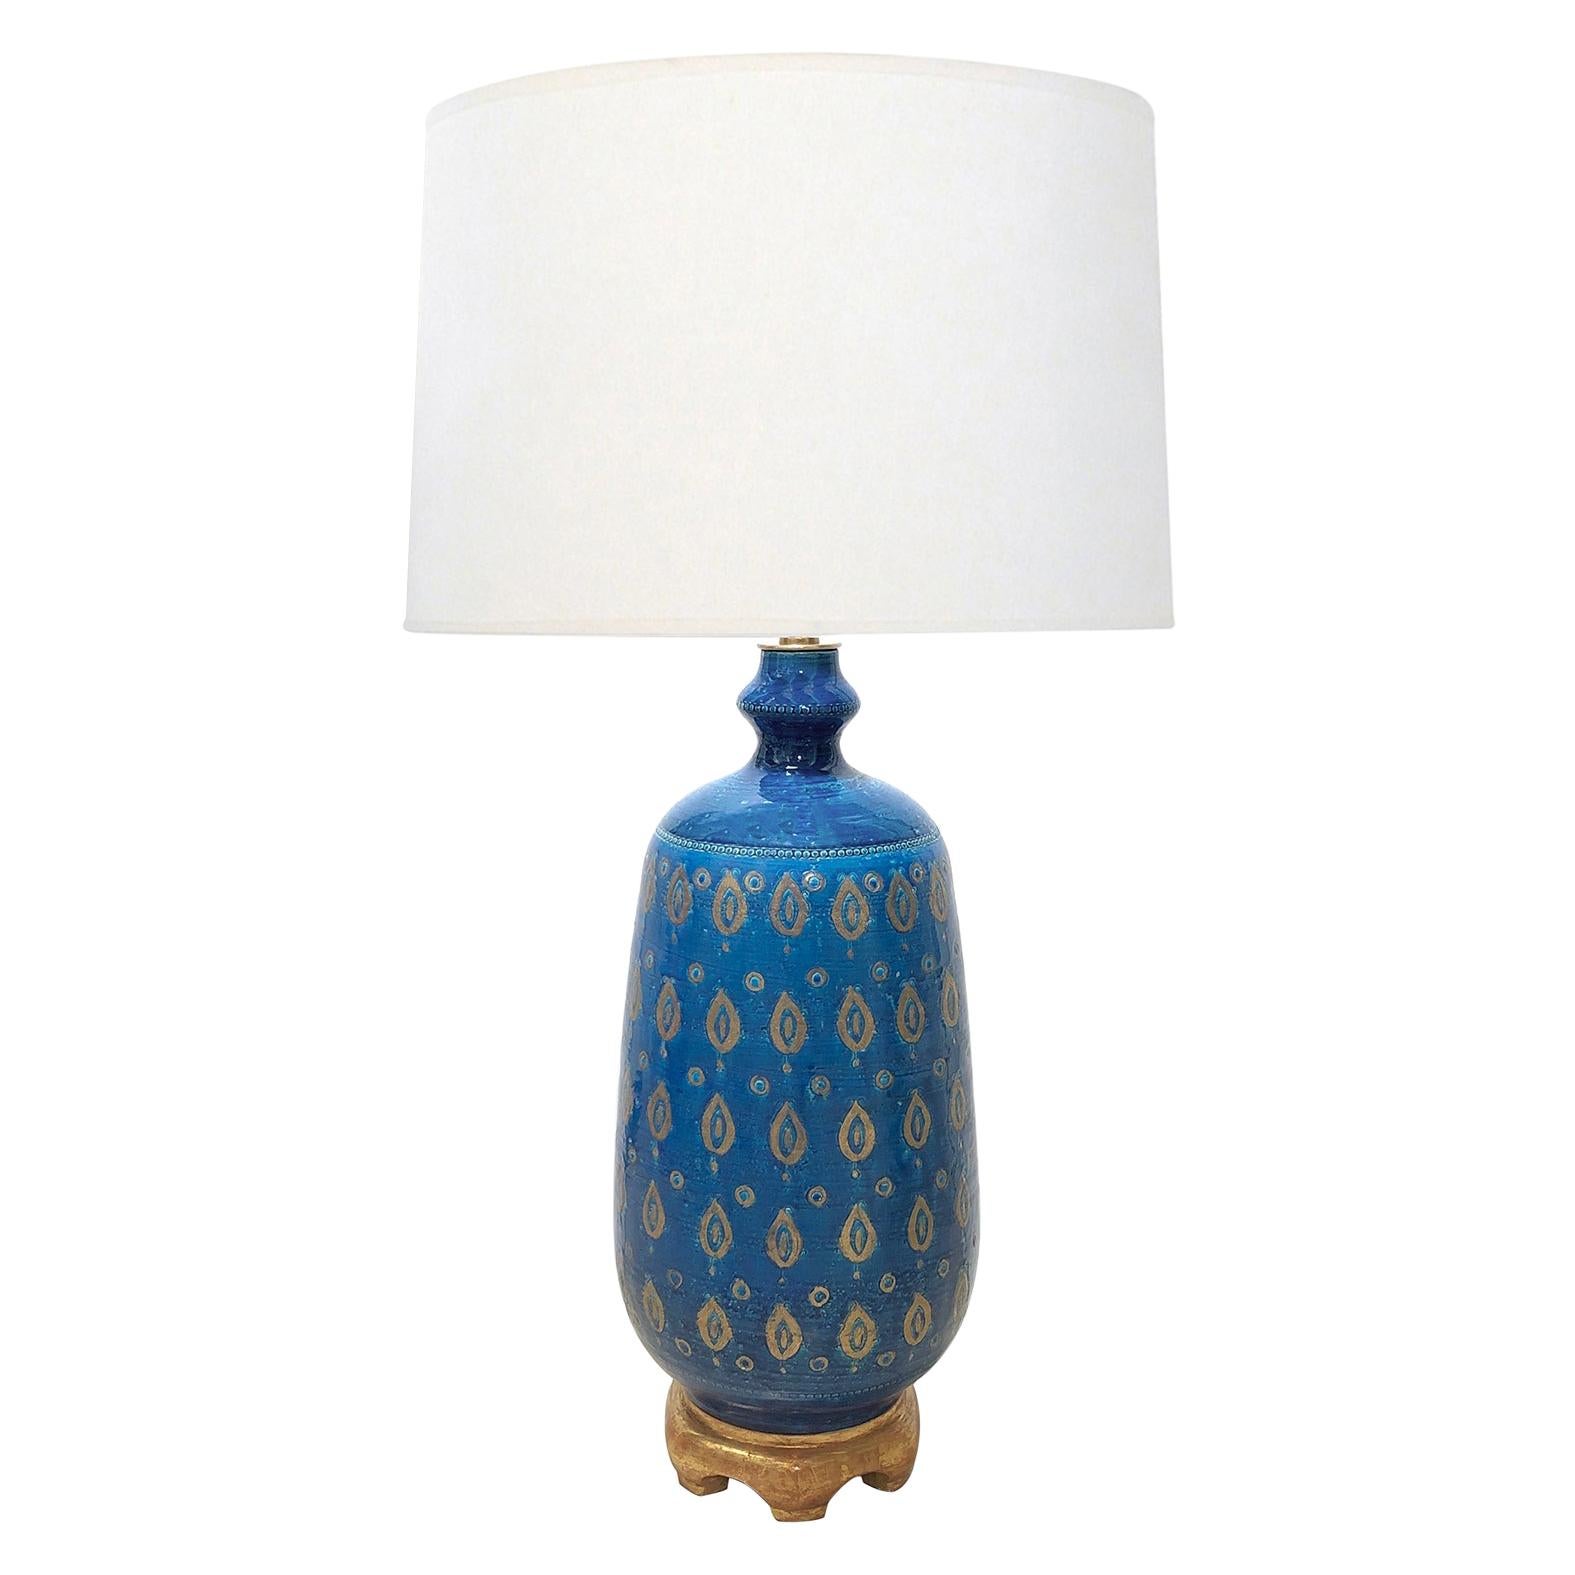 Large 1960's Bitossi Pottery Cerulean-Glazed Lamp with Gilt Decoration For Sale